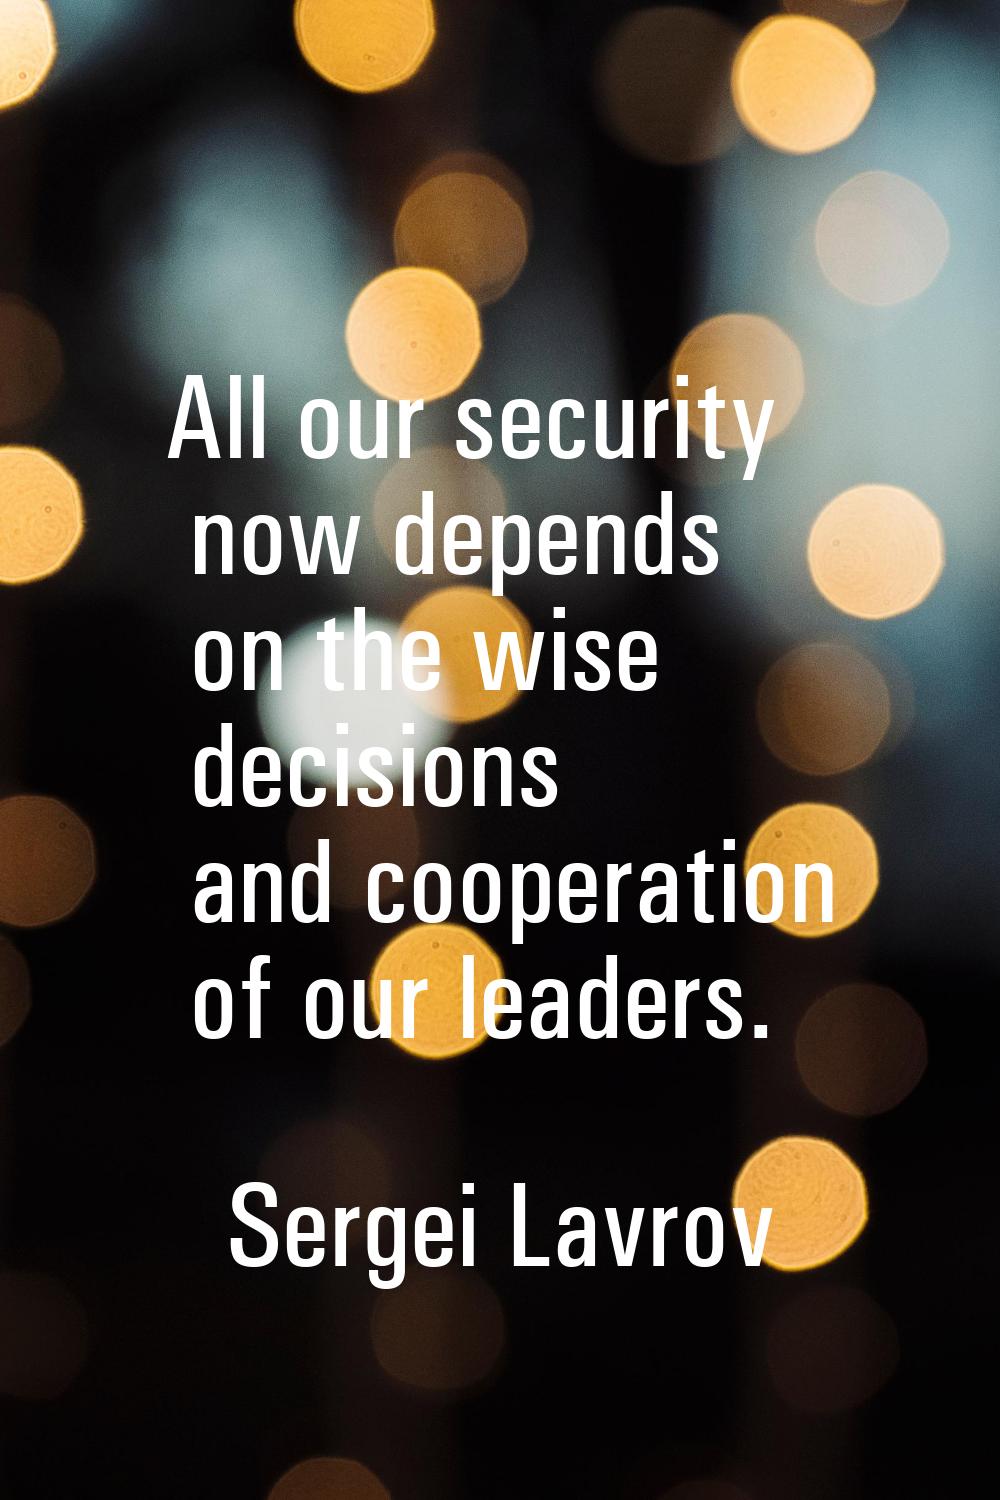 All our security now depends on the wise decisions and cooperation of our leaders.